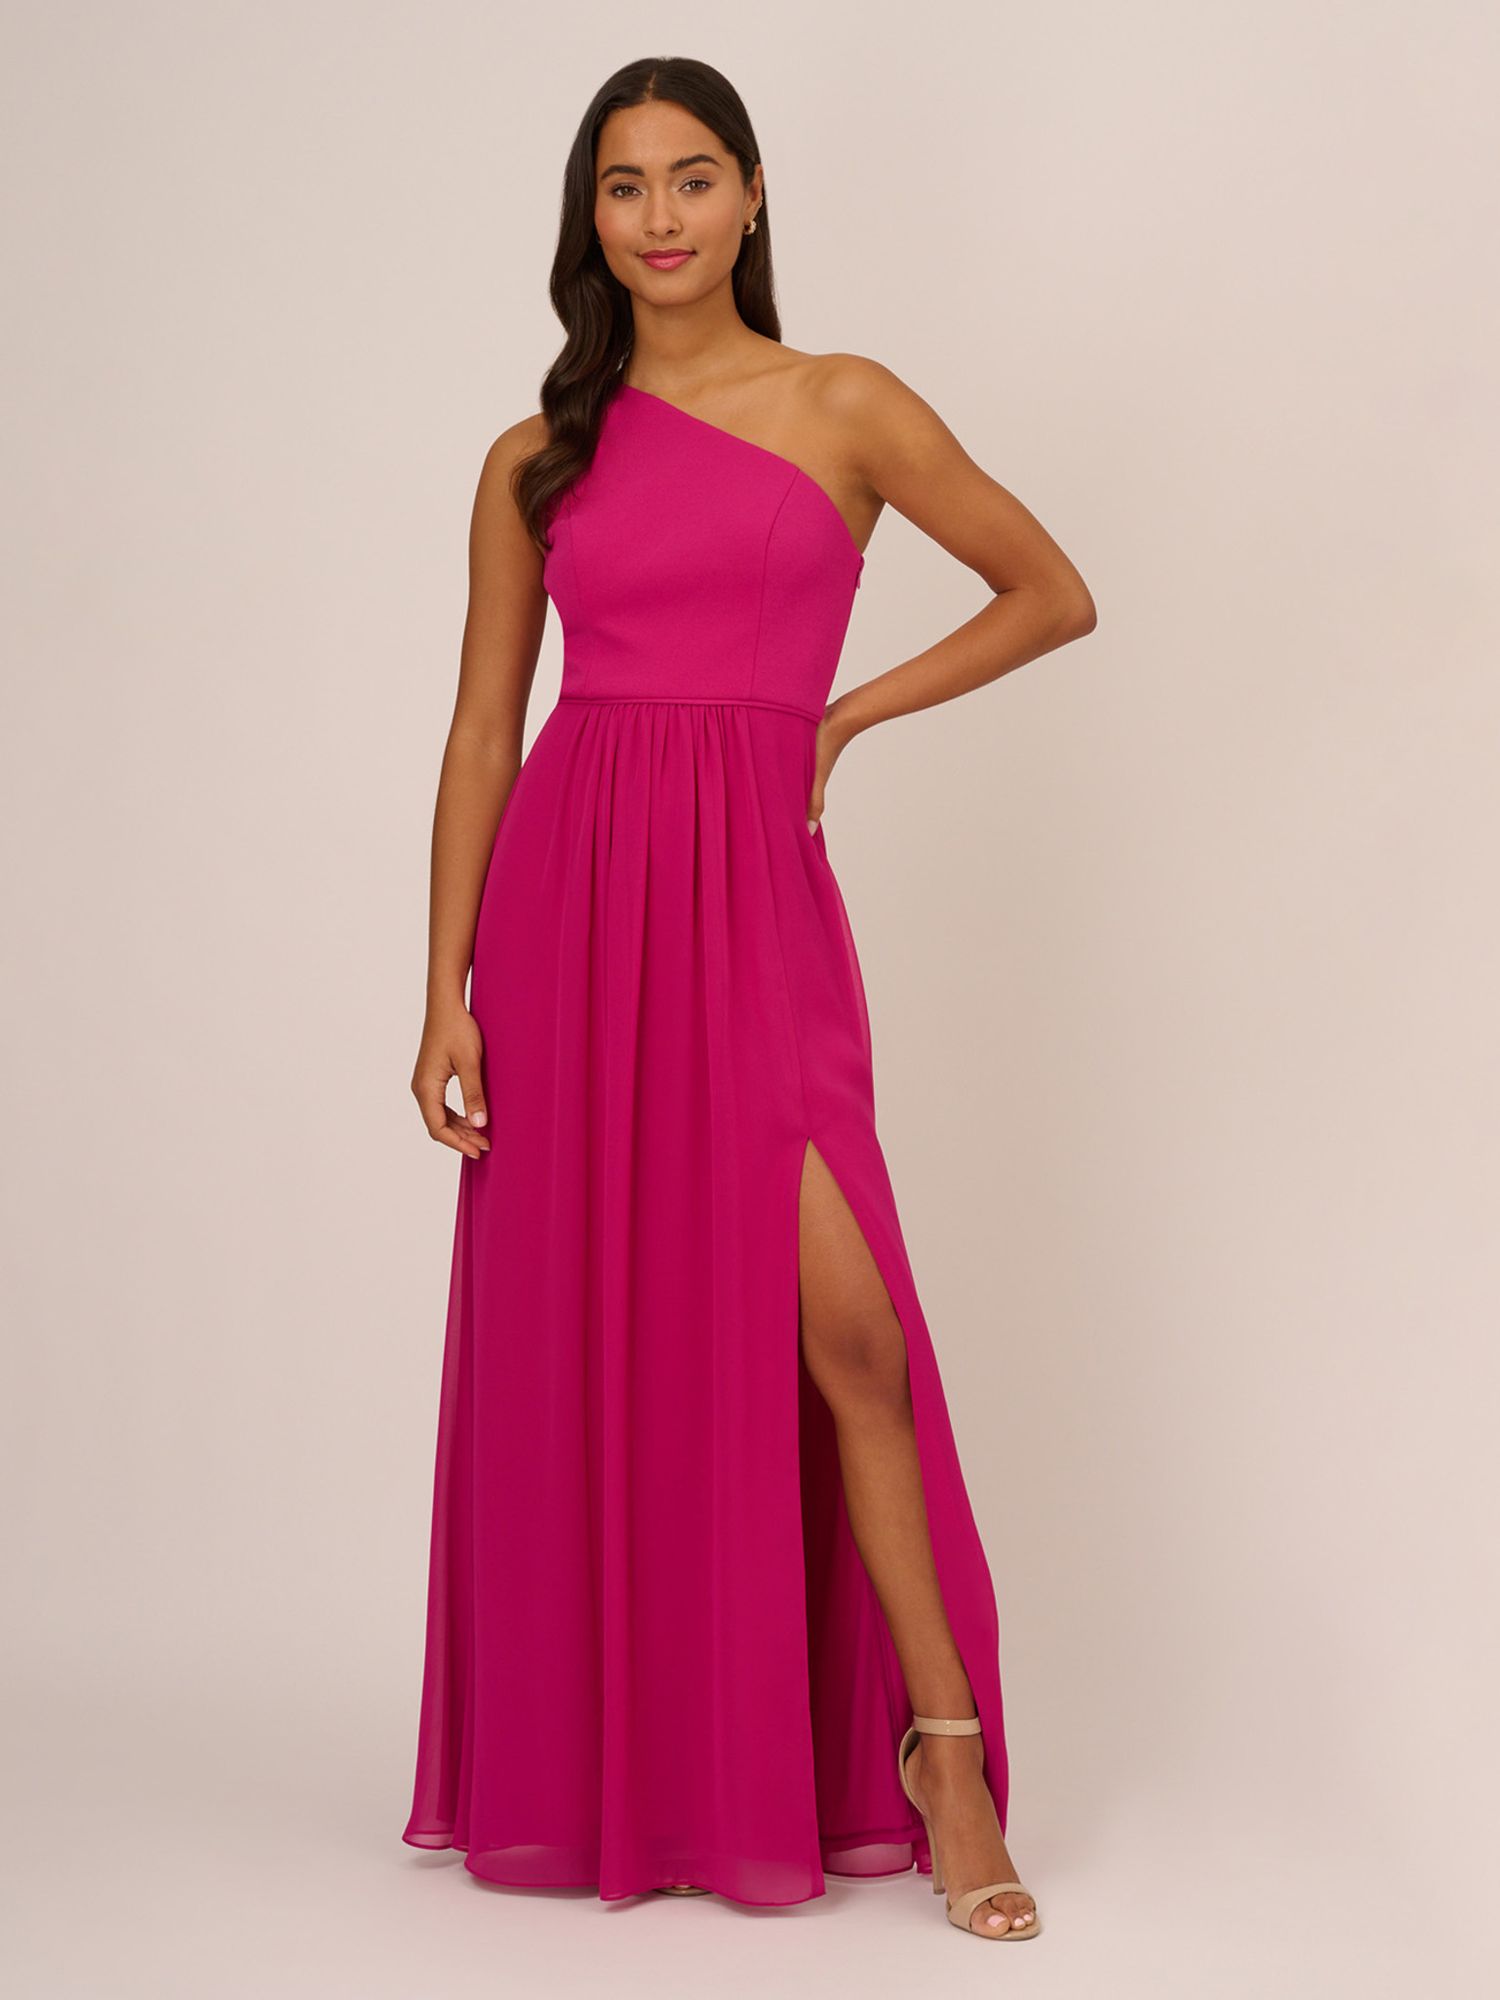 Adrianna Papell One Shoulder Chiffon Gown, Bright Magenta, 8